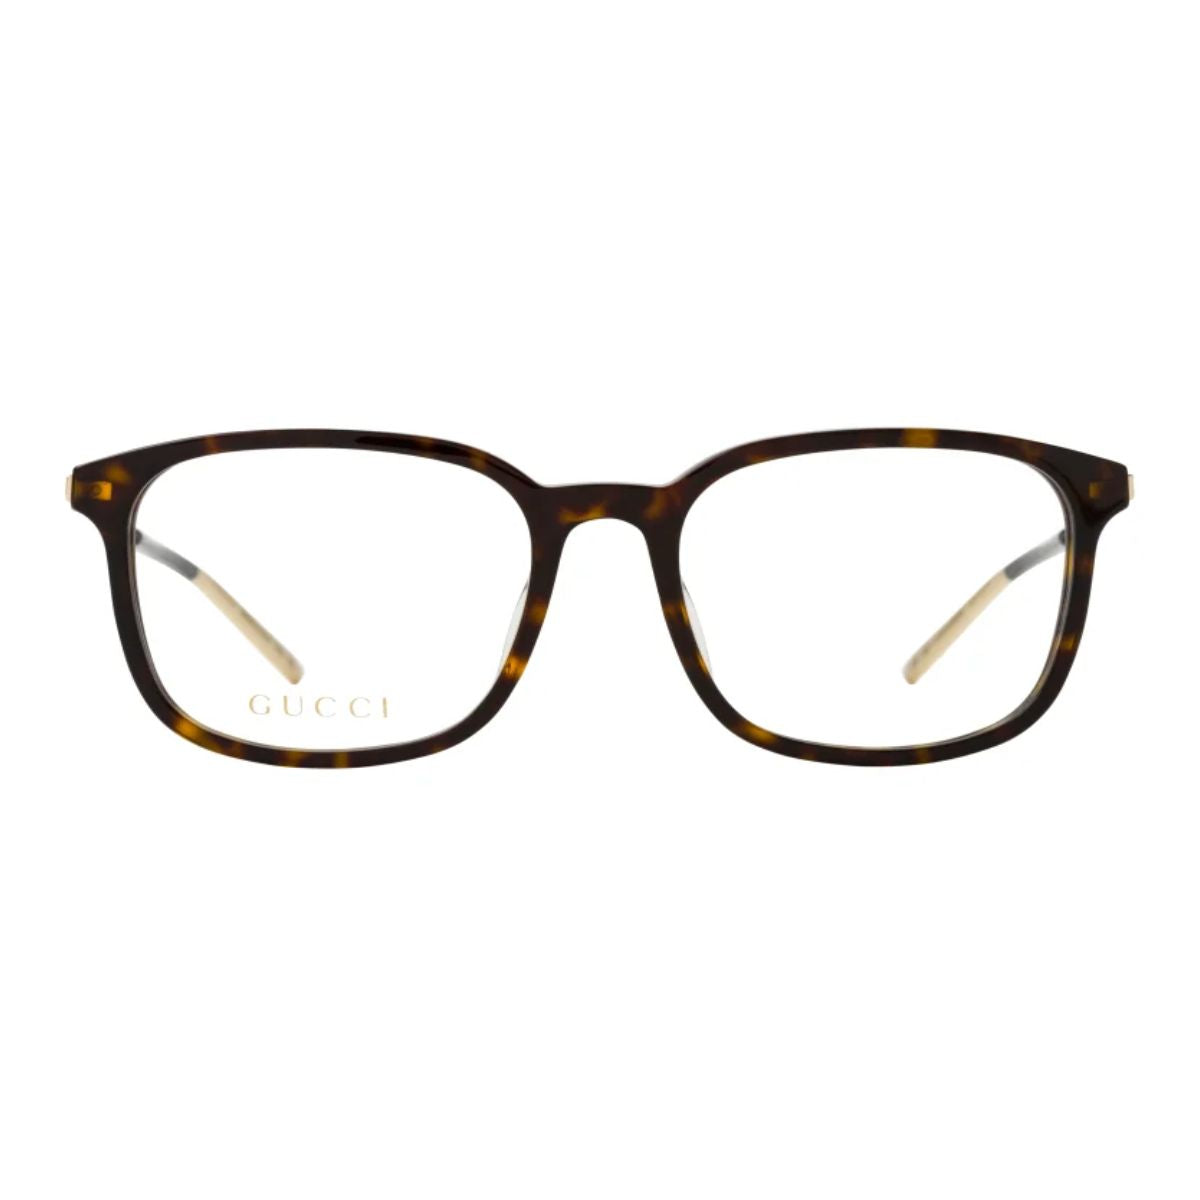 "Gucci 1577O 006 Frames - Versatile eyewear designed for men and women, available at Optorium."